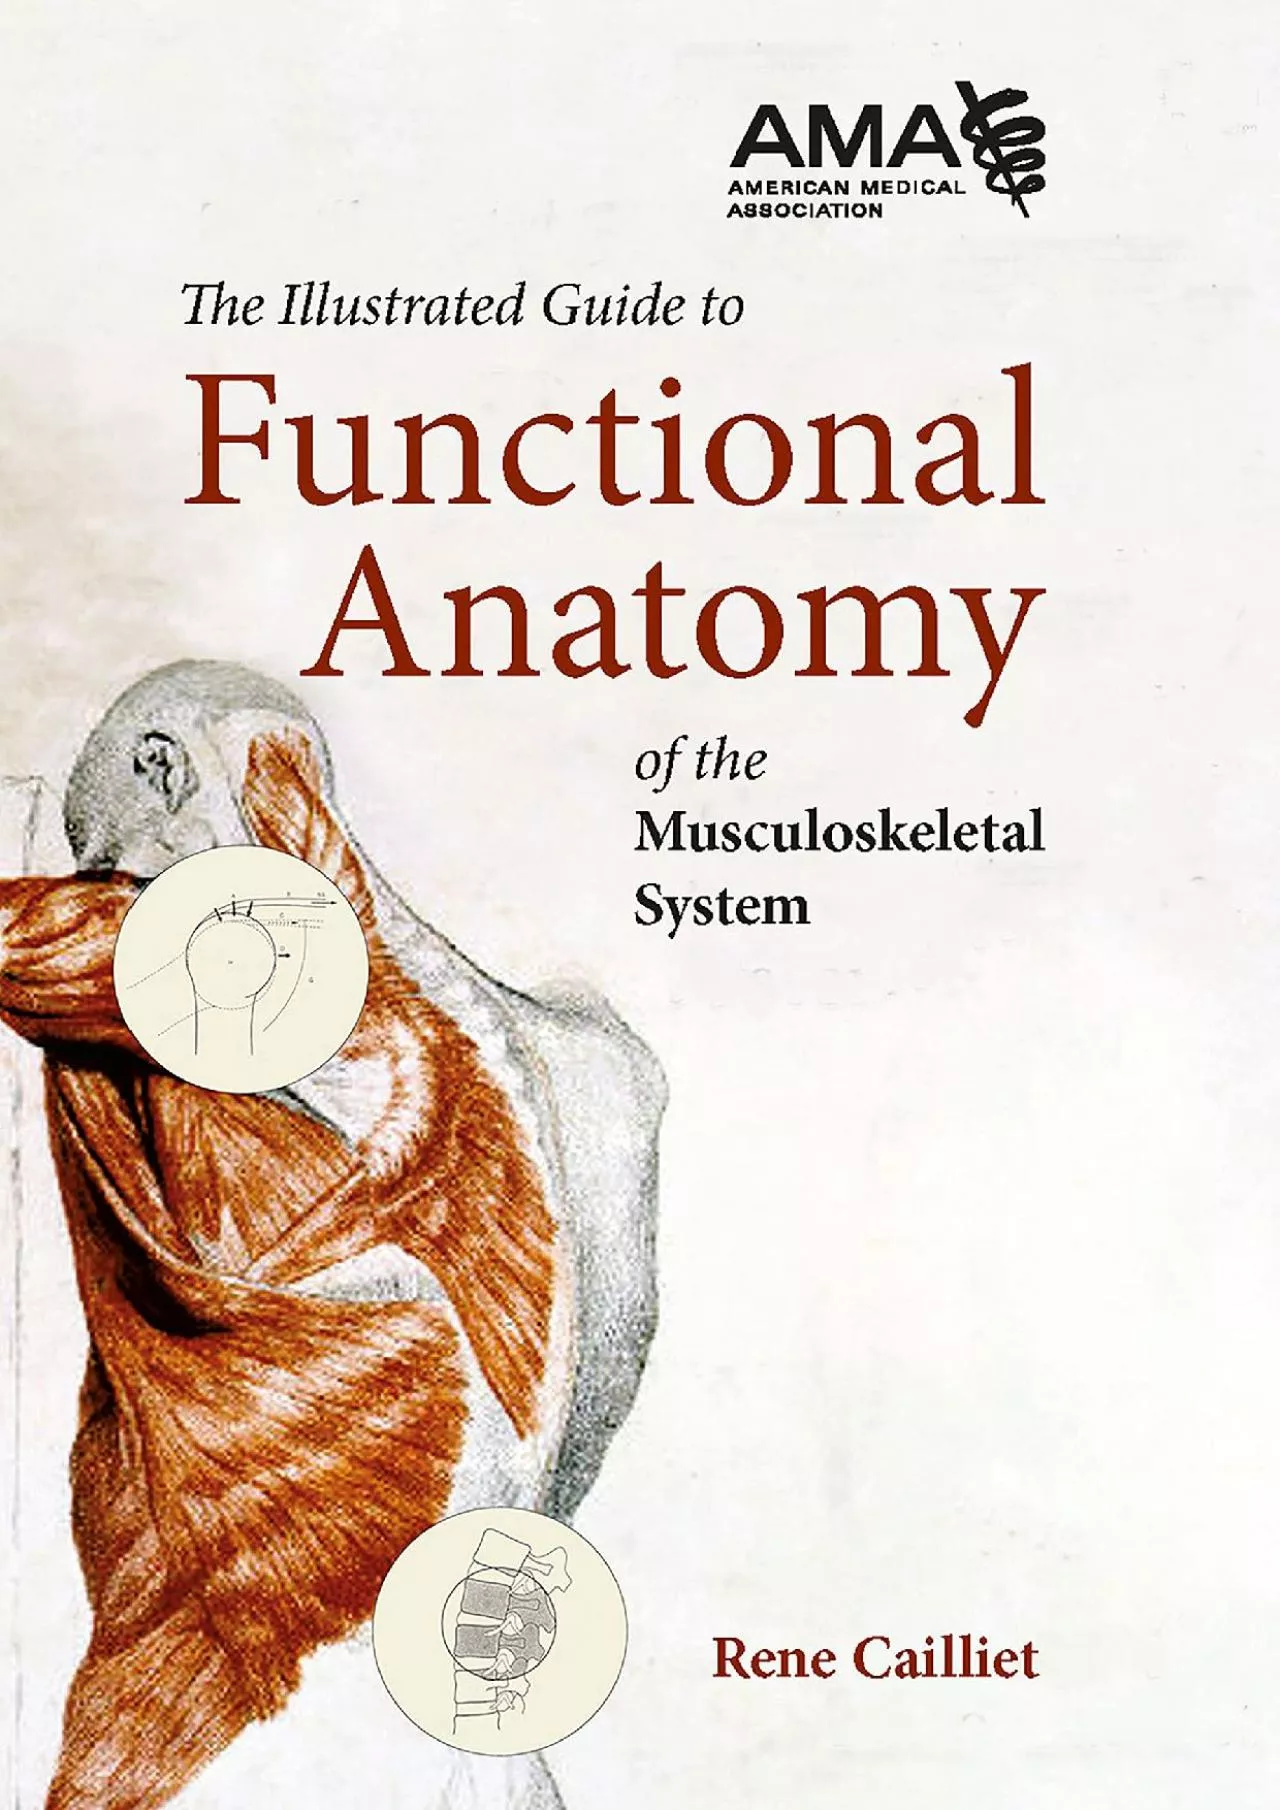 (BOOK)-The Illustrated Guide to Functional Anatomy of the Musculokeletal System